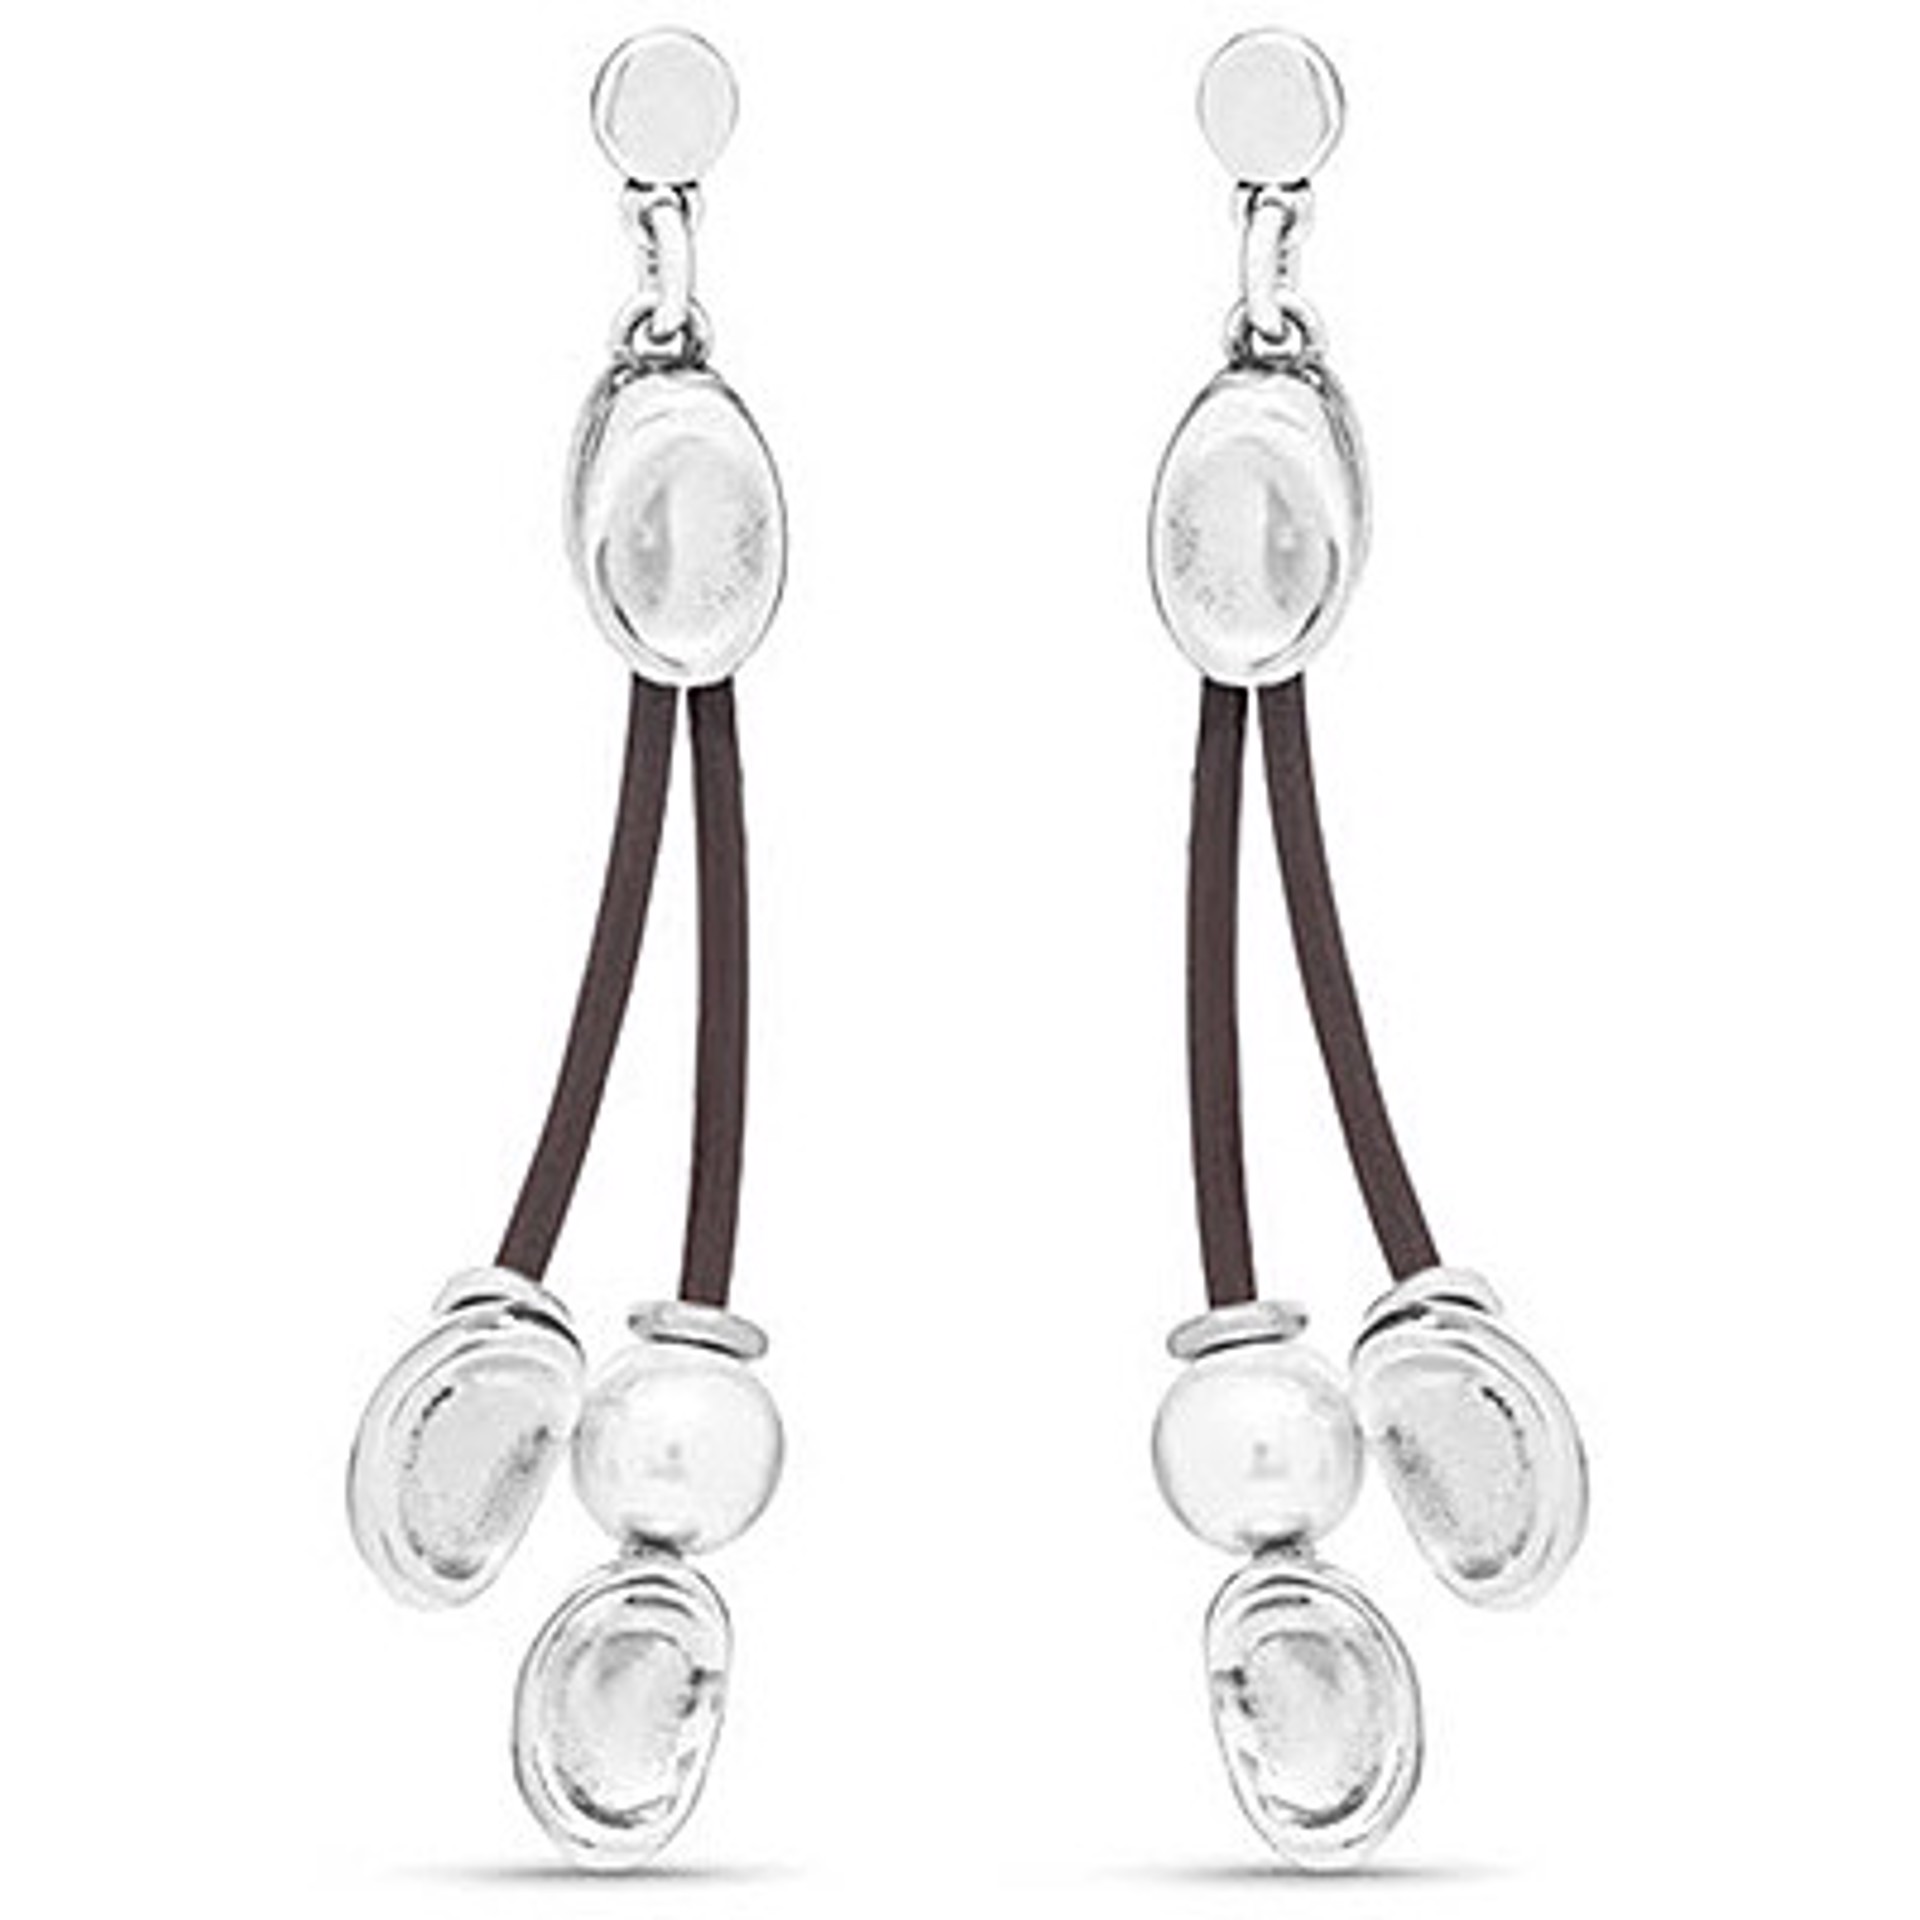 9441 Silver Earrings with Pearl hanging from Spanish Leather by UNO DE 50